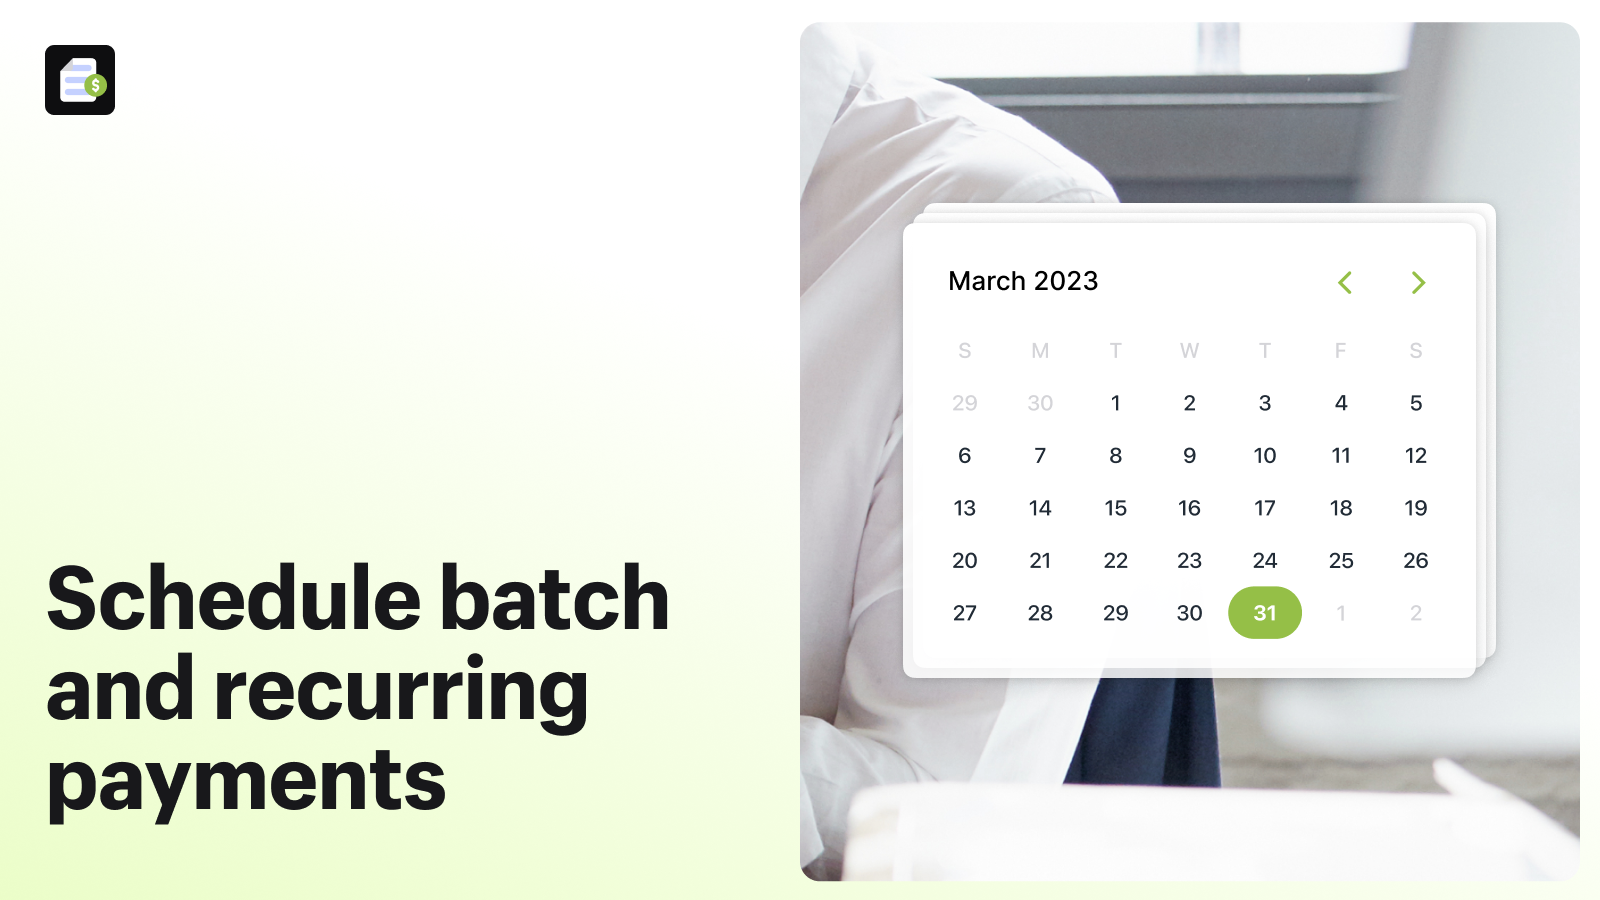 Schedule batch and recurring payments